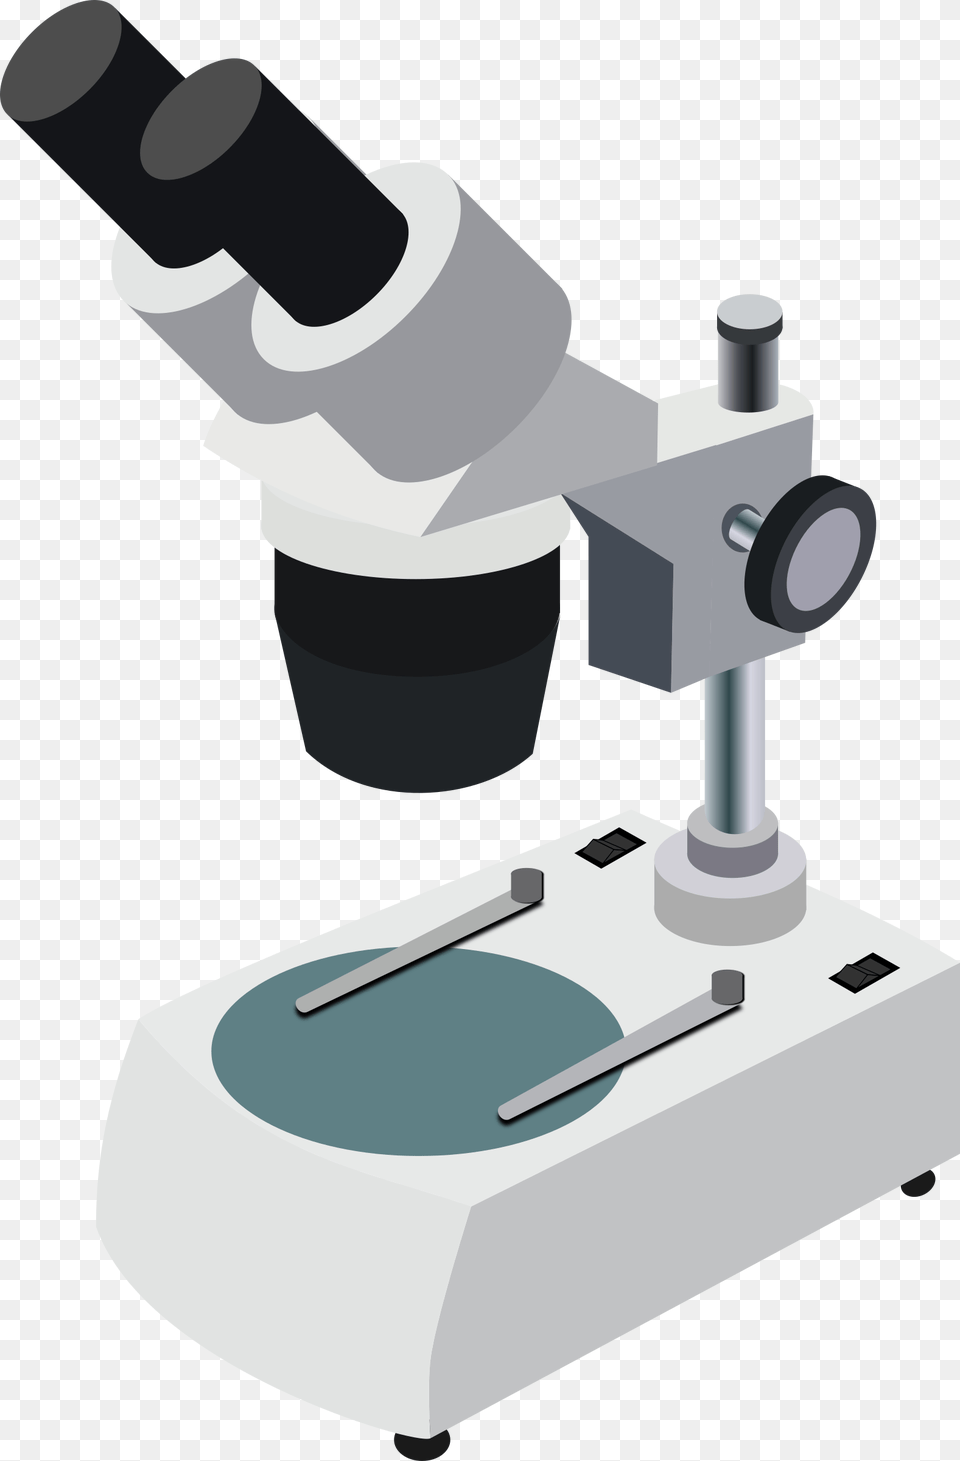 Microscope Svg Clip Arts Microscope Clipart, Bottle, Shaker Free Png